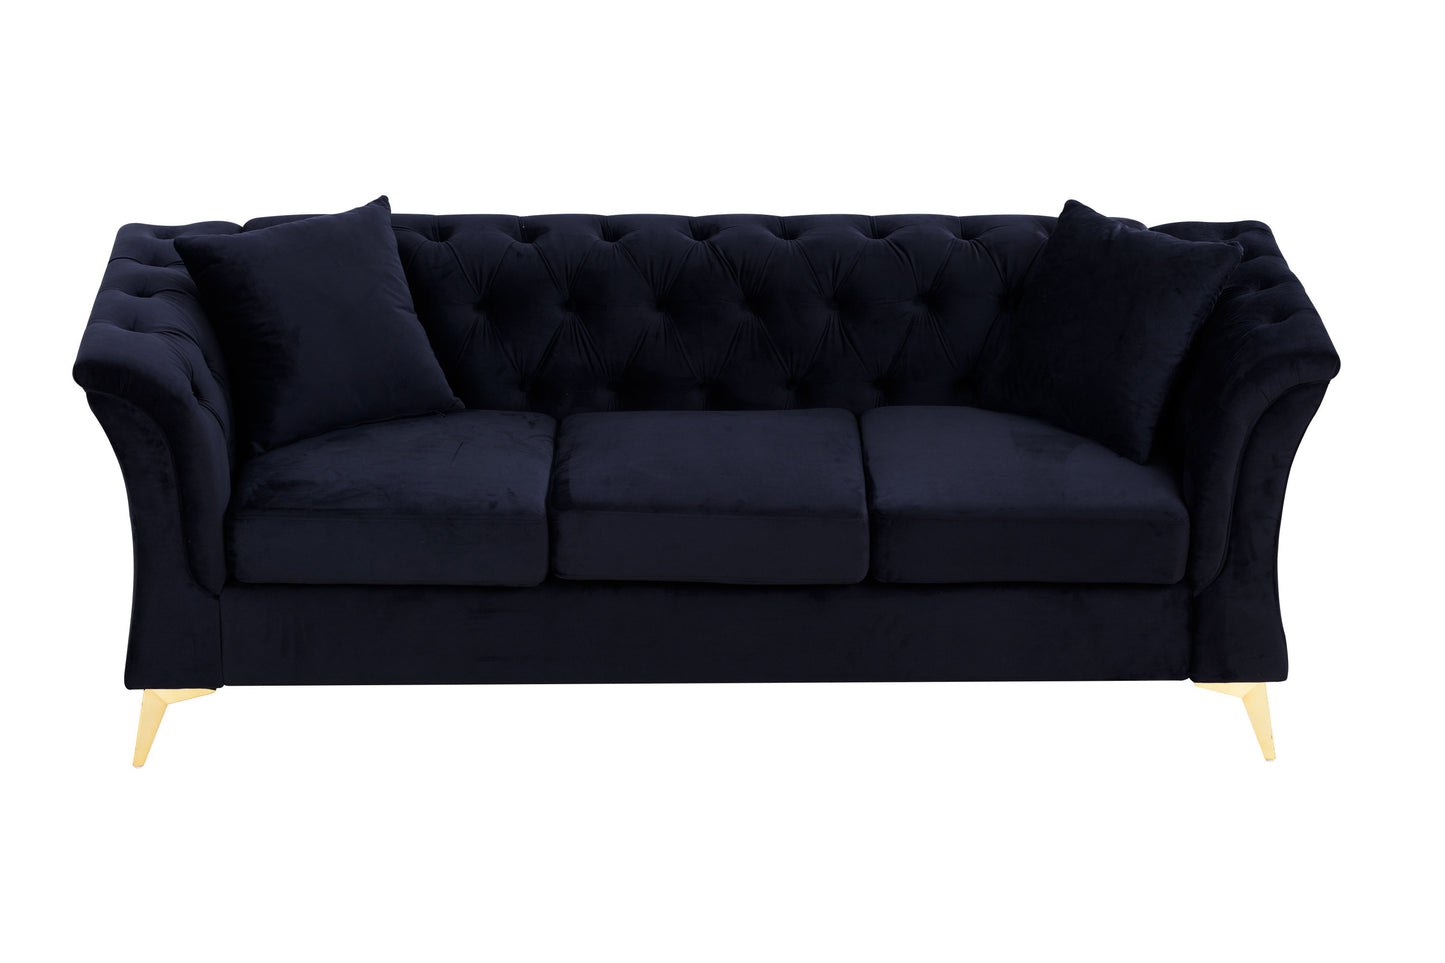 Modern Chesterfield Curved Sofa Tufted Velvet Couch 3 Seat Button Tufed Couch with Scroll Arms and Gold Metal Legs Black